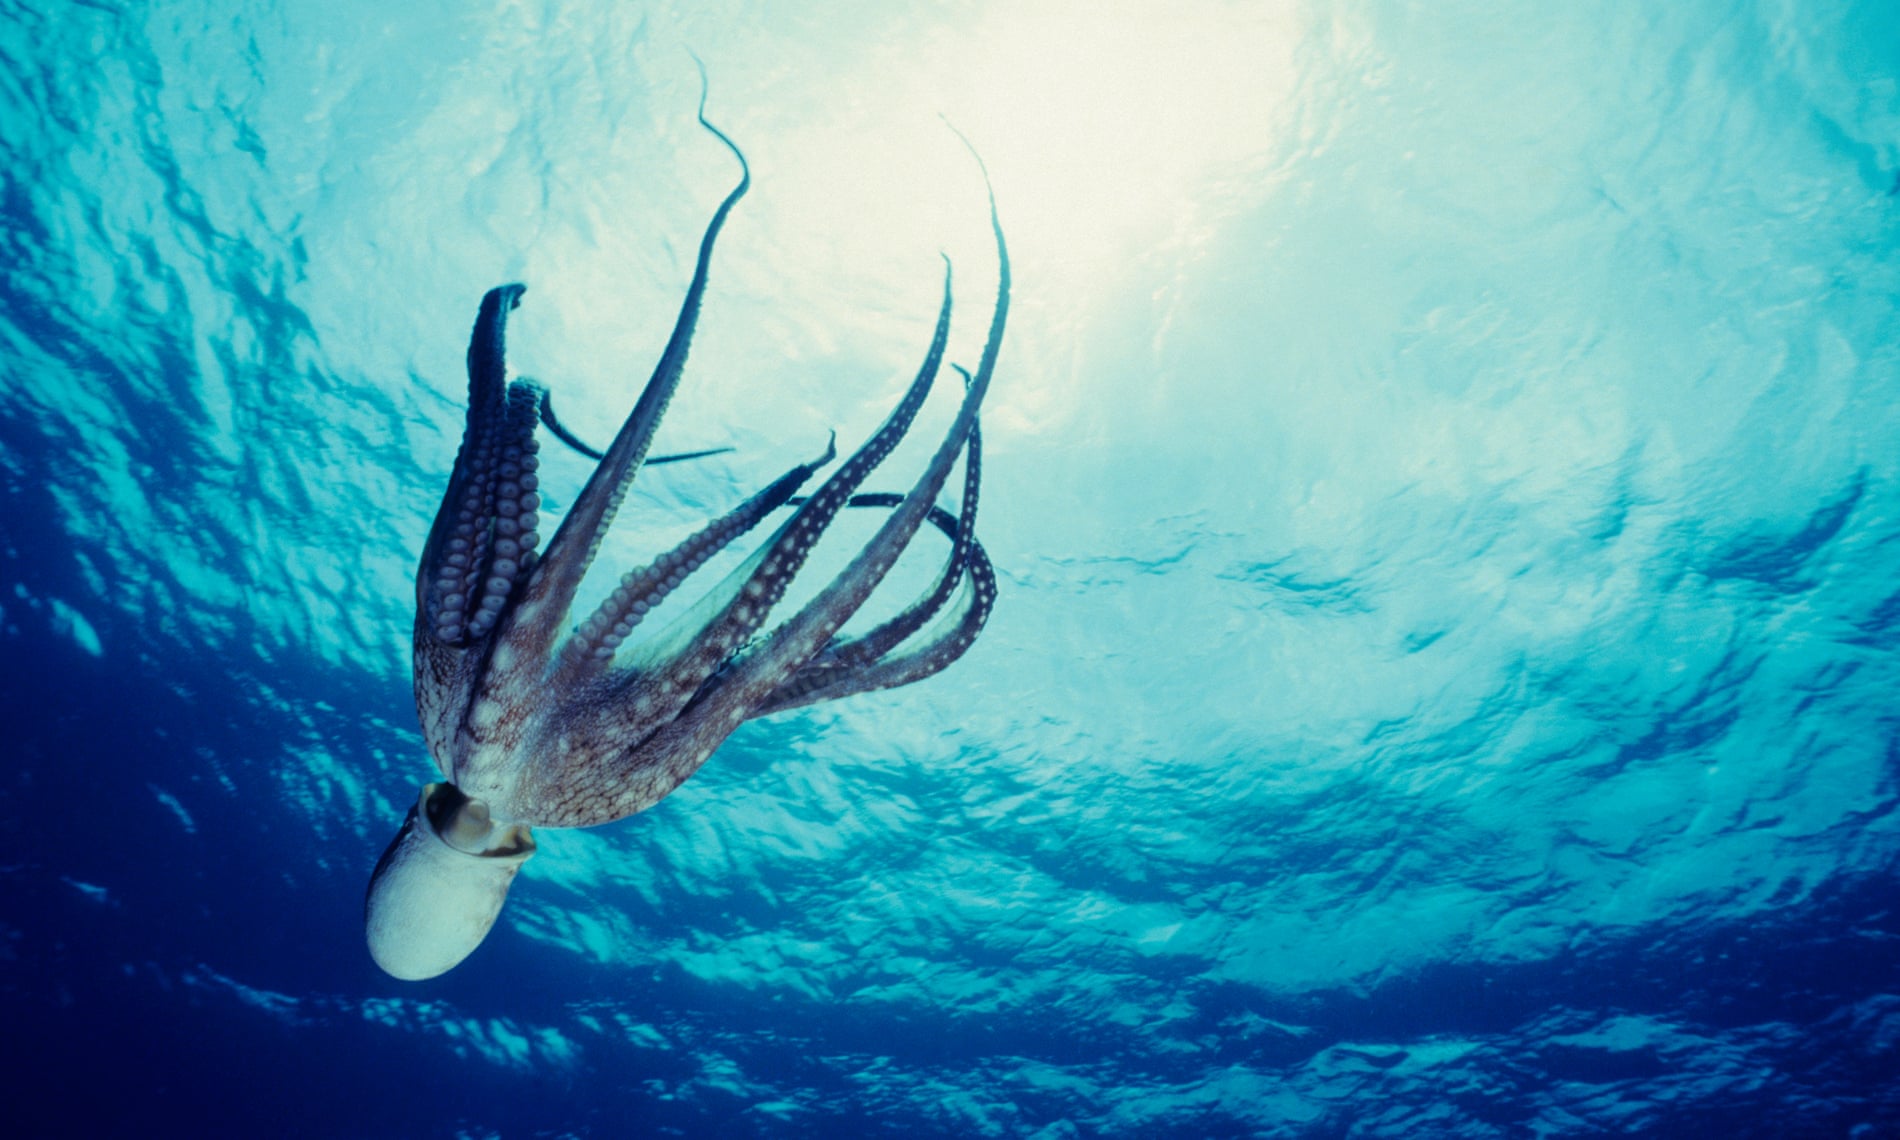 Octopus farming turns my stomach – but are some species really more worthy than others?